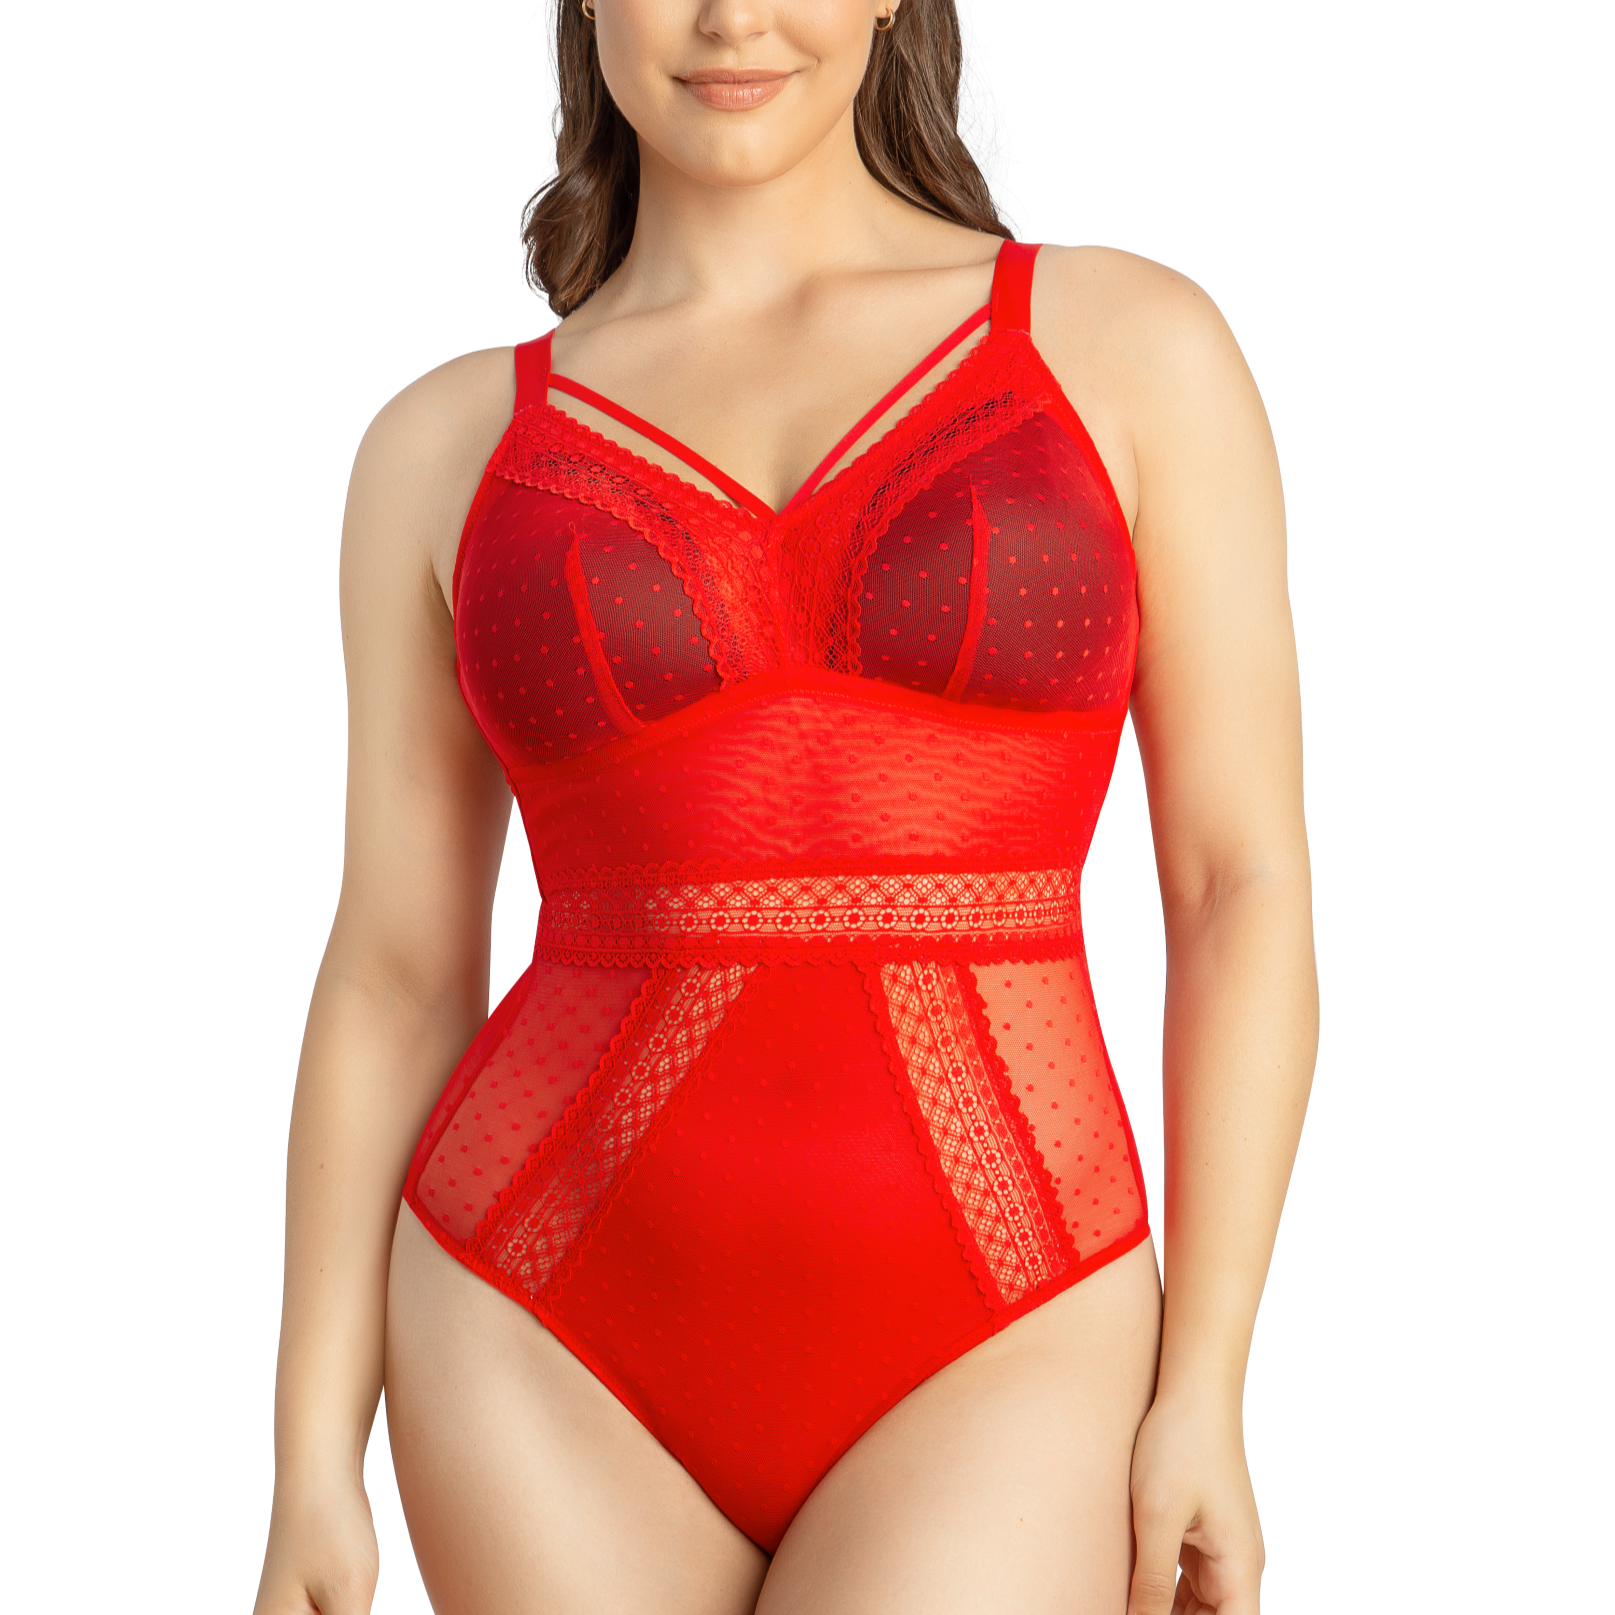 Mia Dot Wirefree Padded Mesh Bodysuit - P6017 - Racing Red Bras & Lingerie - Lingerie - Bodysuits PARFAIT RED S-PLUS 